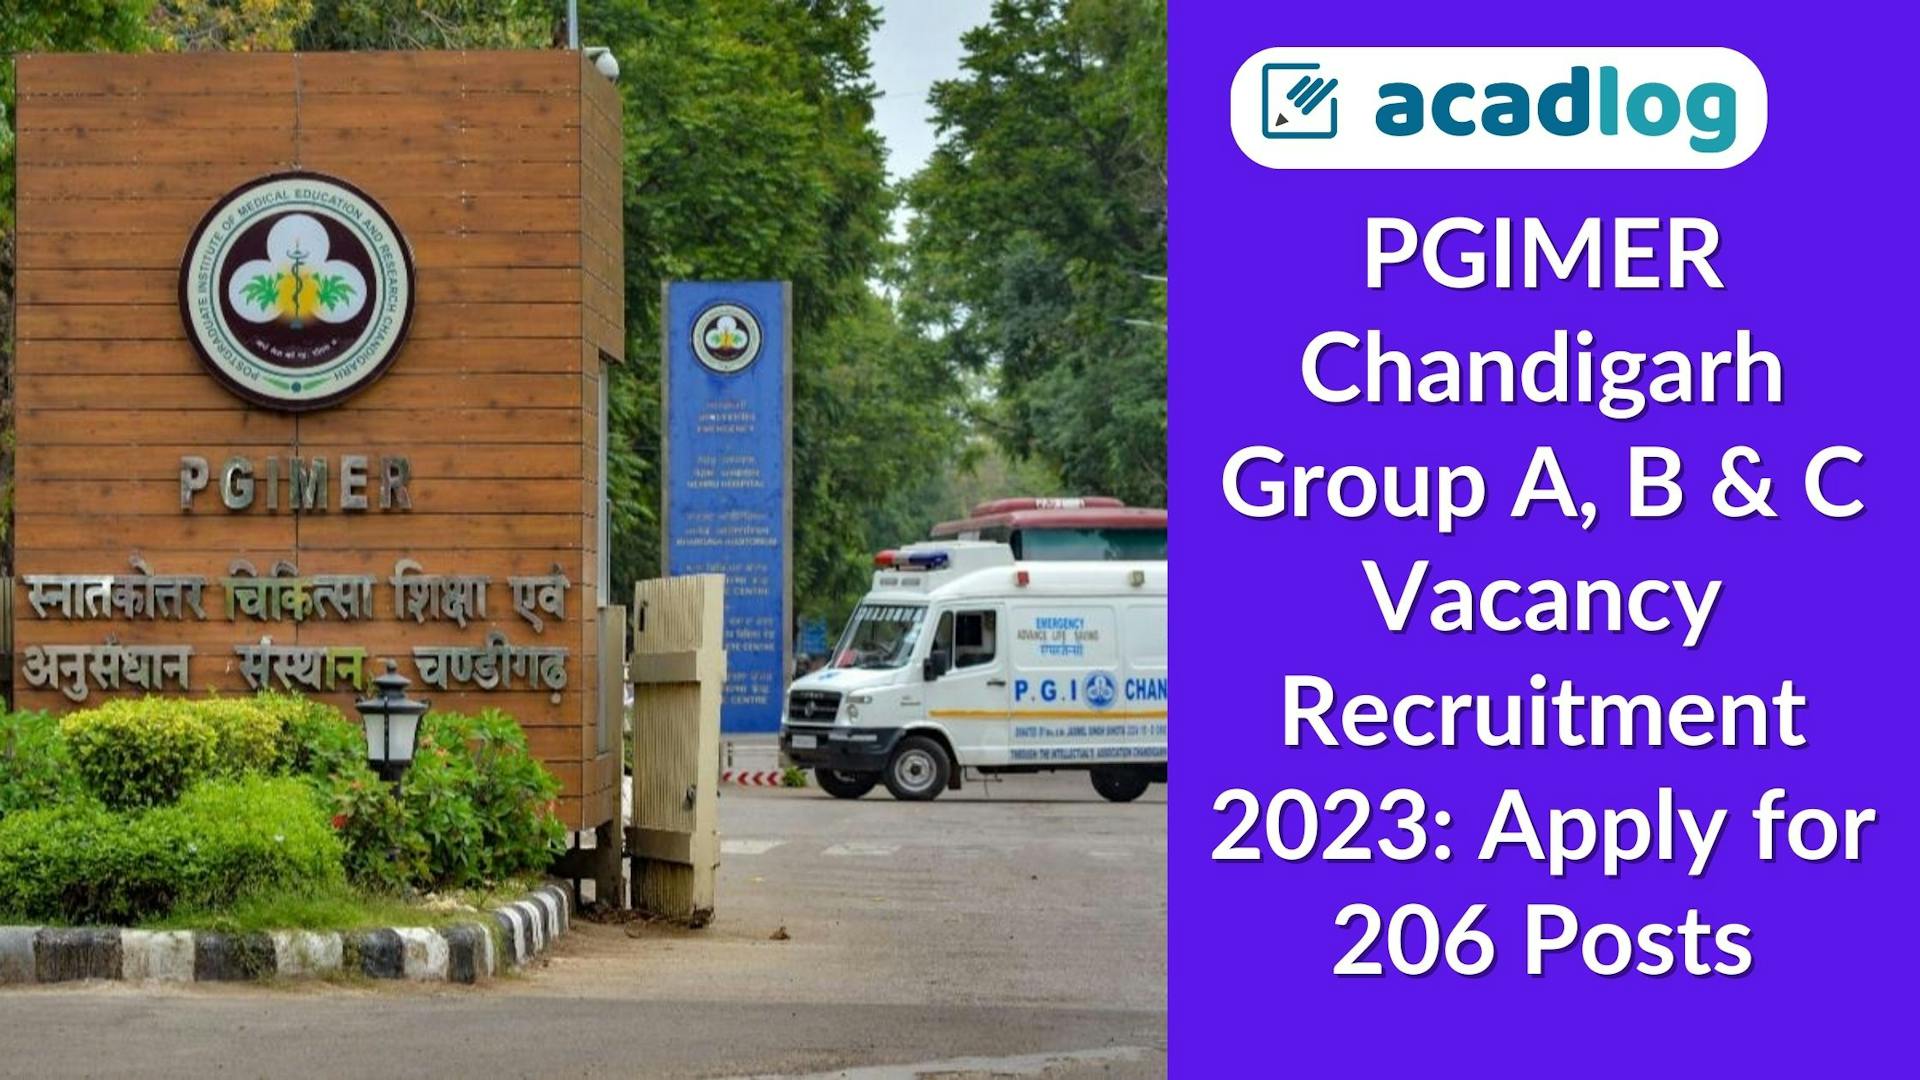 PGIMER Chandigarh Group A, B & C Vacancy Recruitment 2023: Apply for 206 Posts